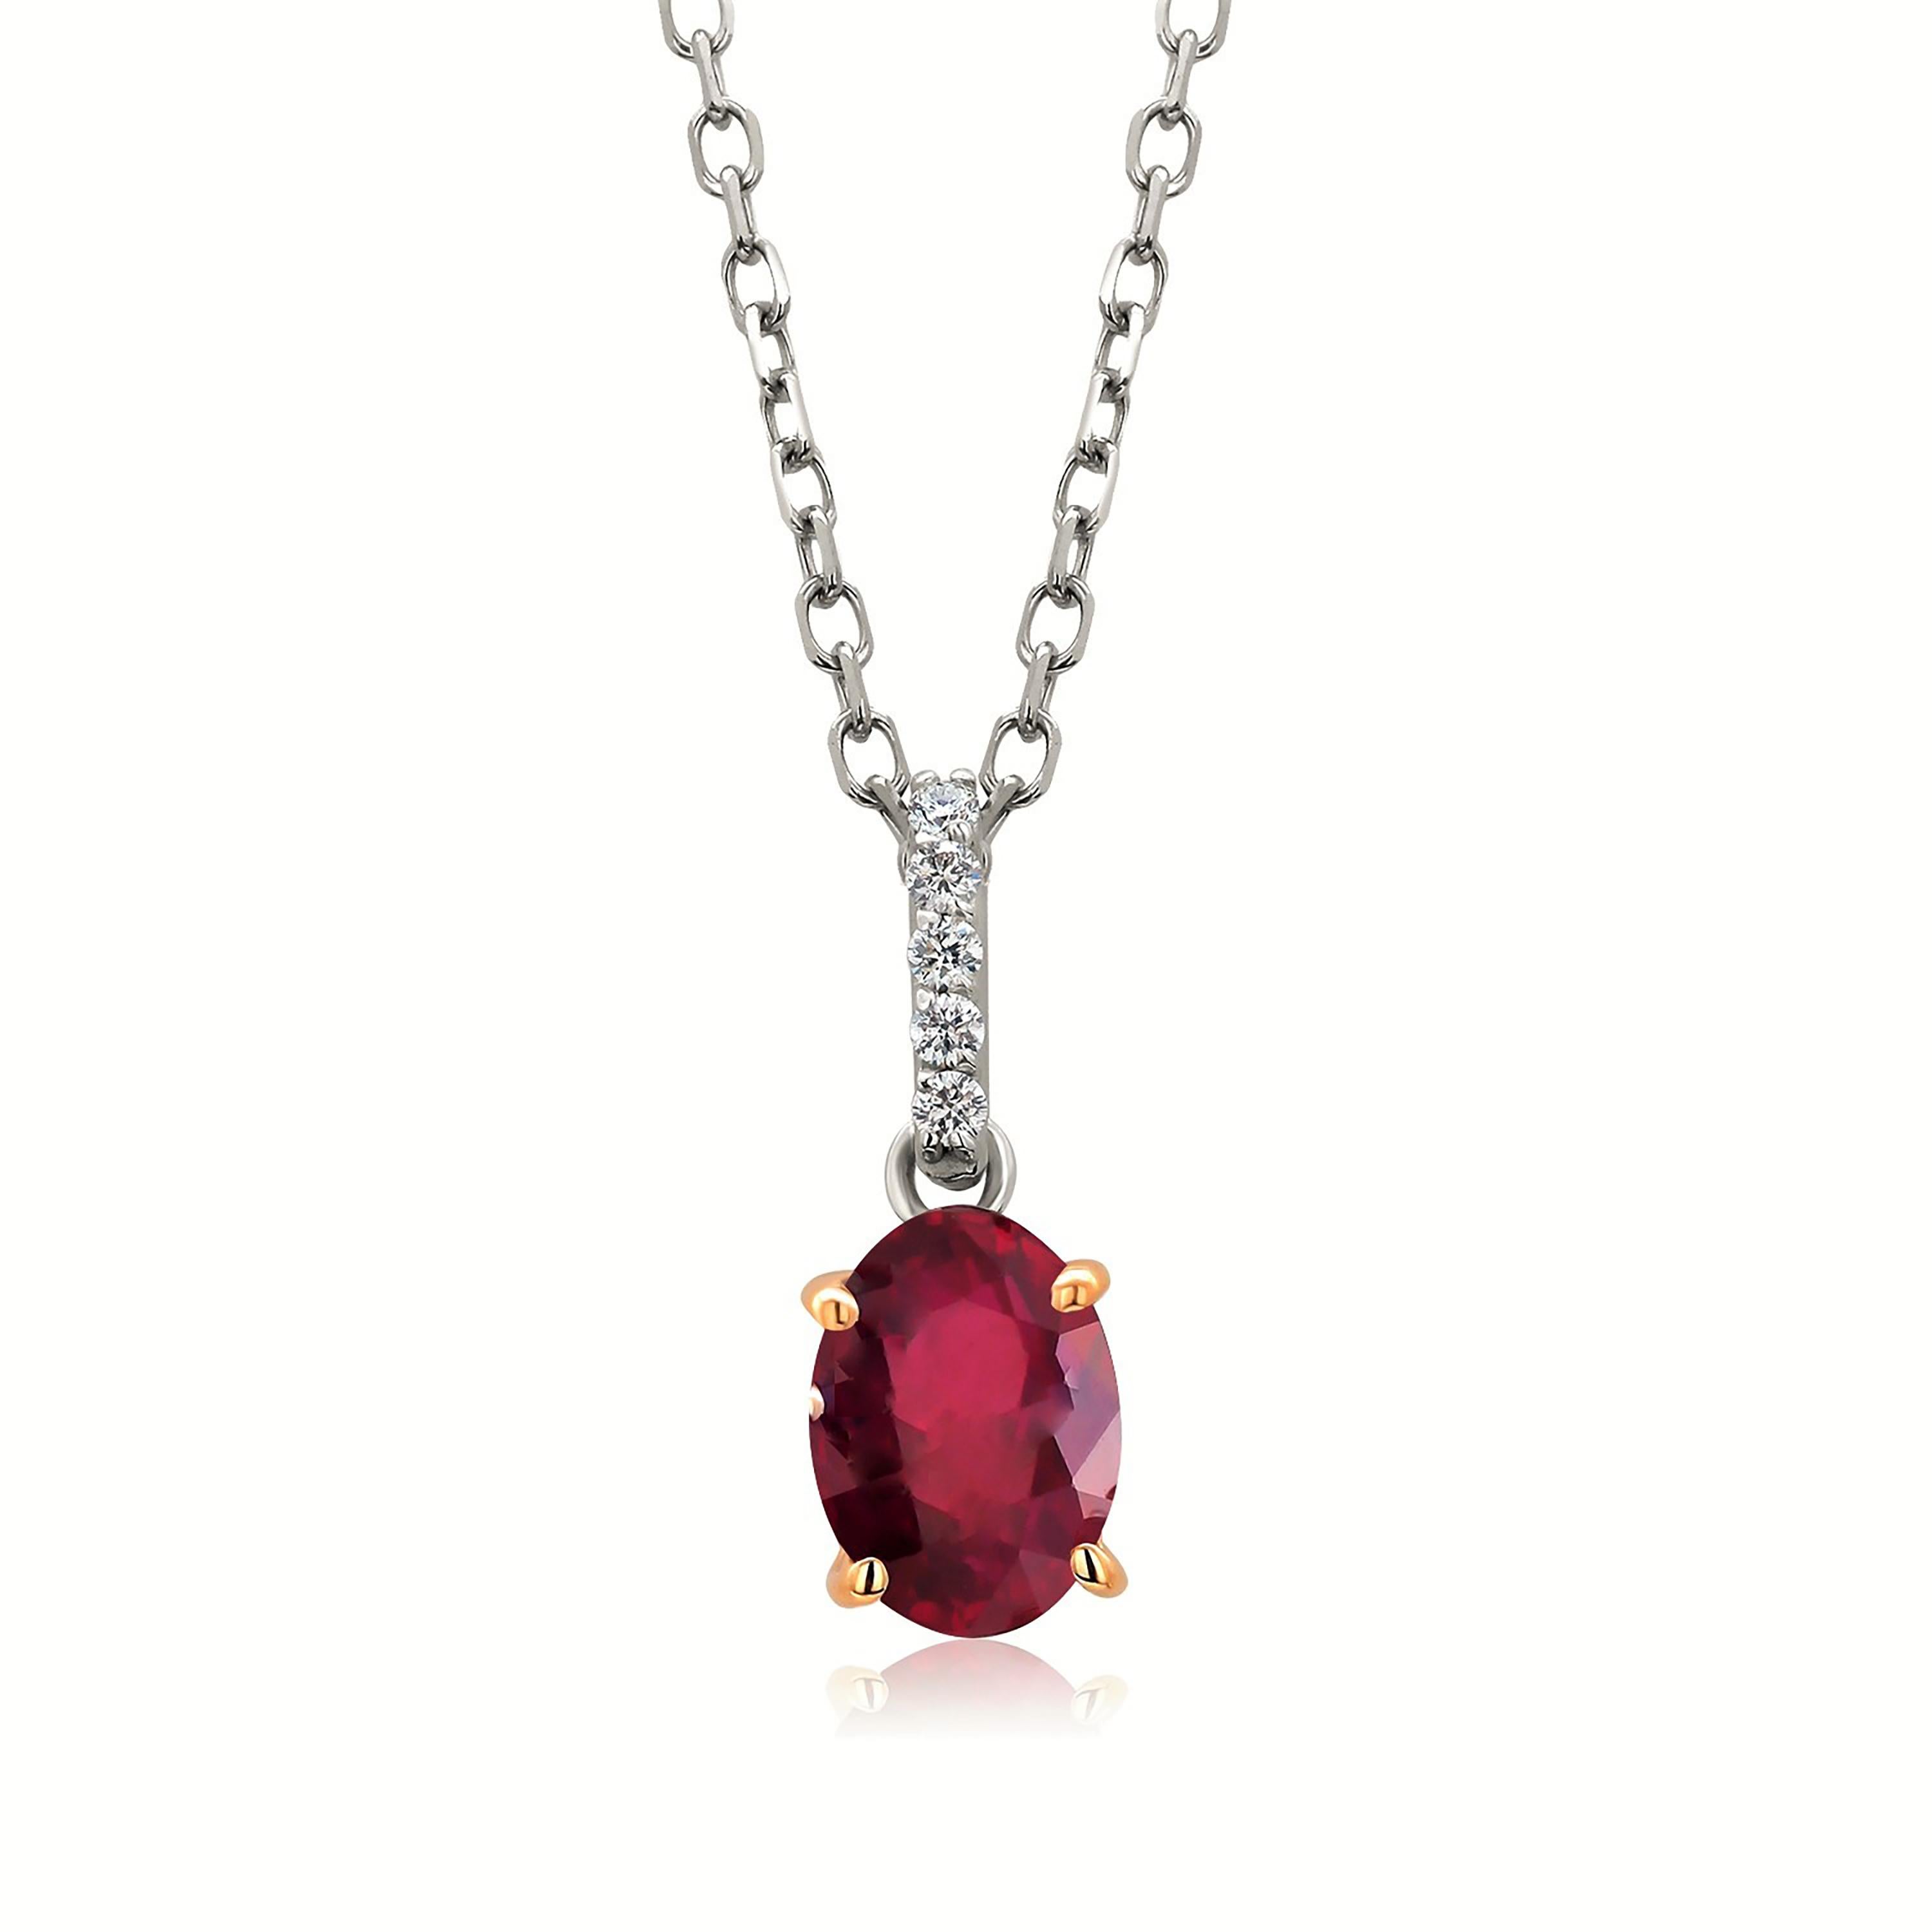 Oval Cut Oval Burma Red Ruby with Diamond Bail White and Yellow Gold Pendant Necklace